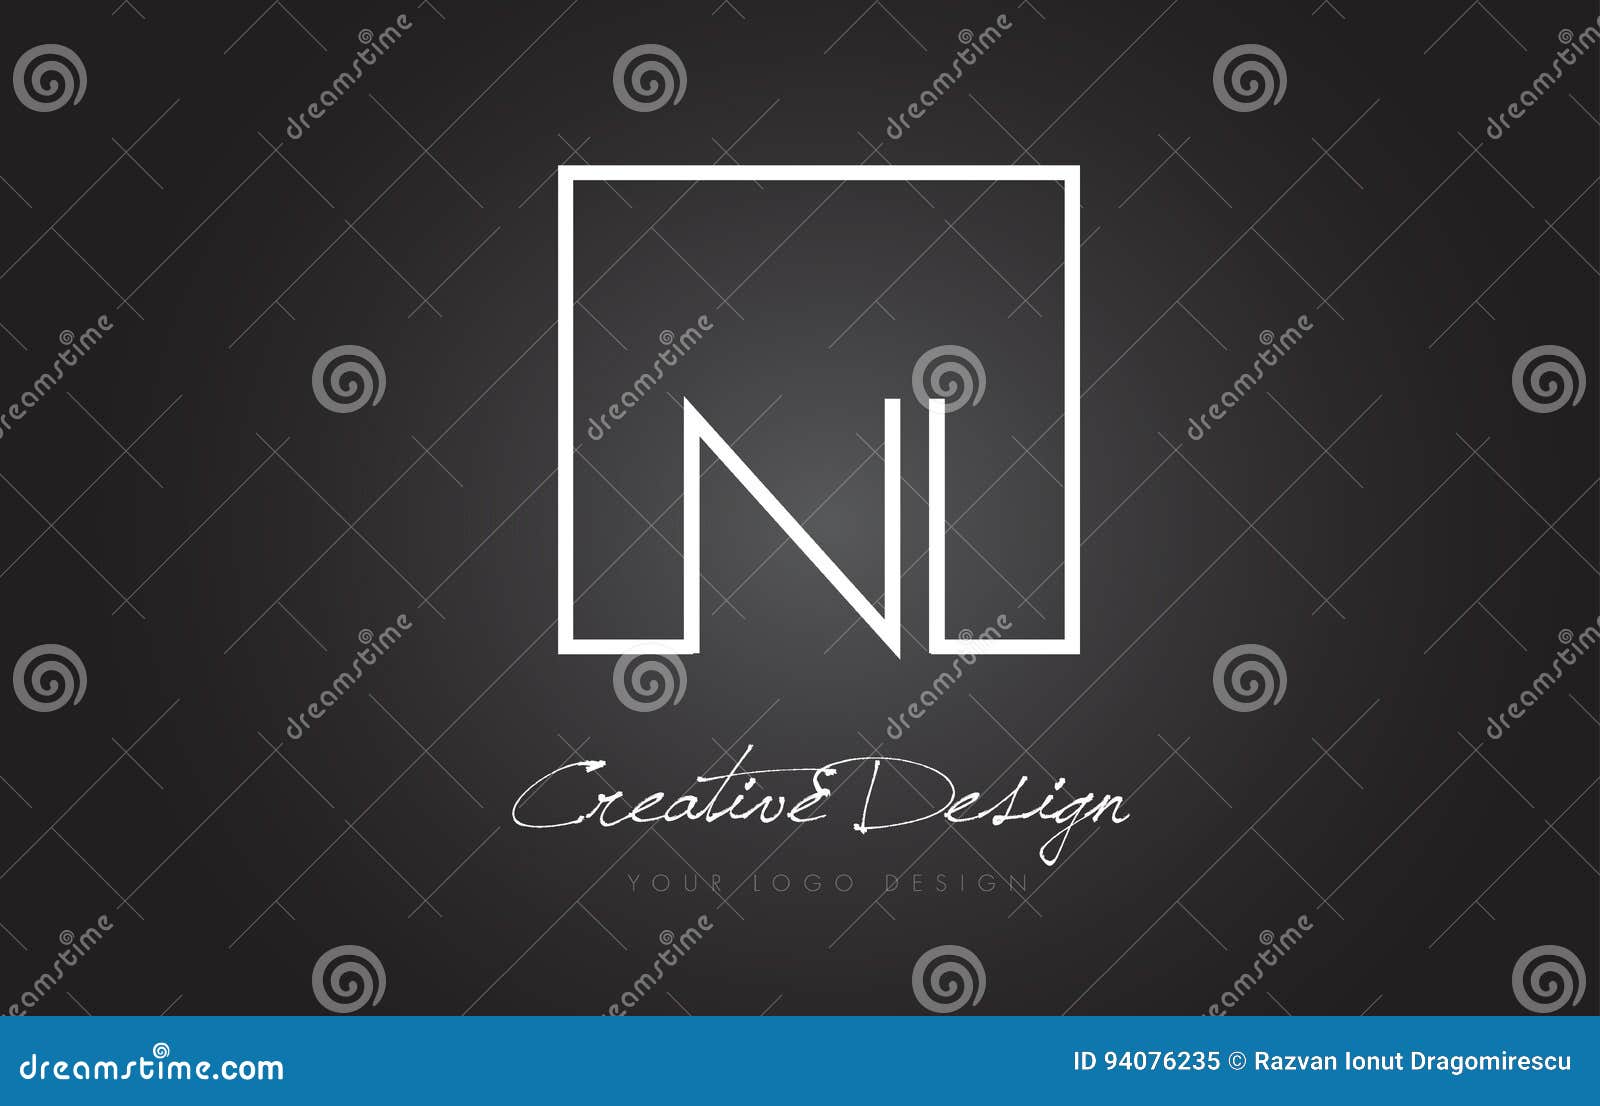 ni square frame letter logo  with black and white colors.